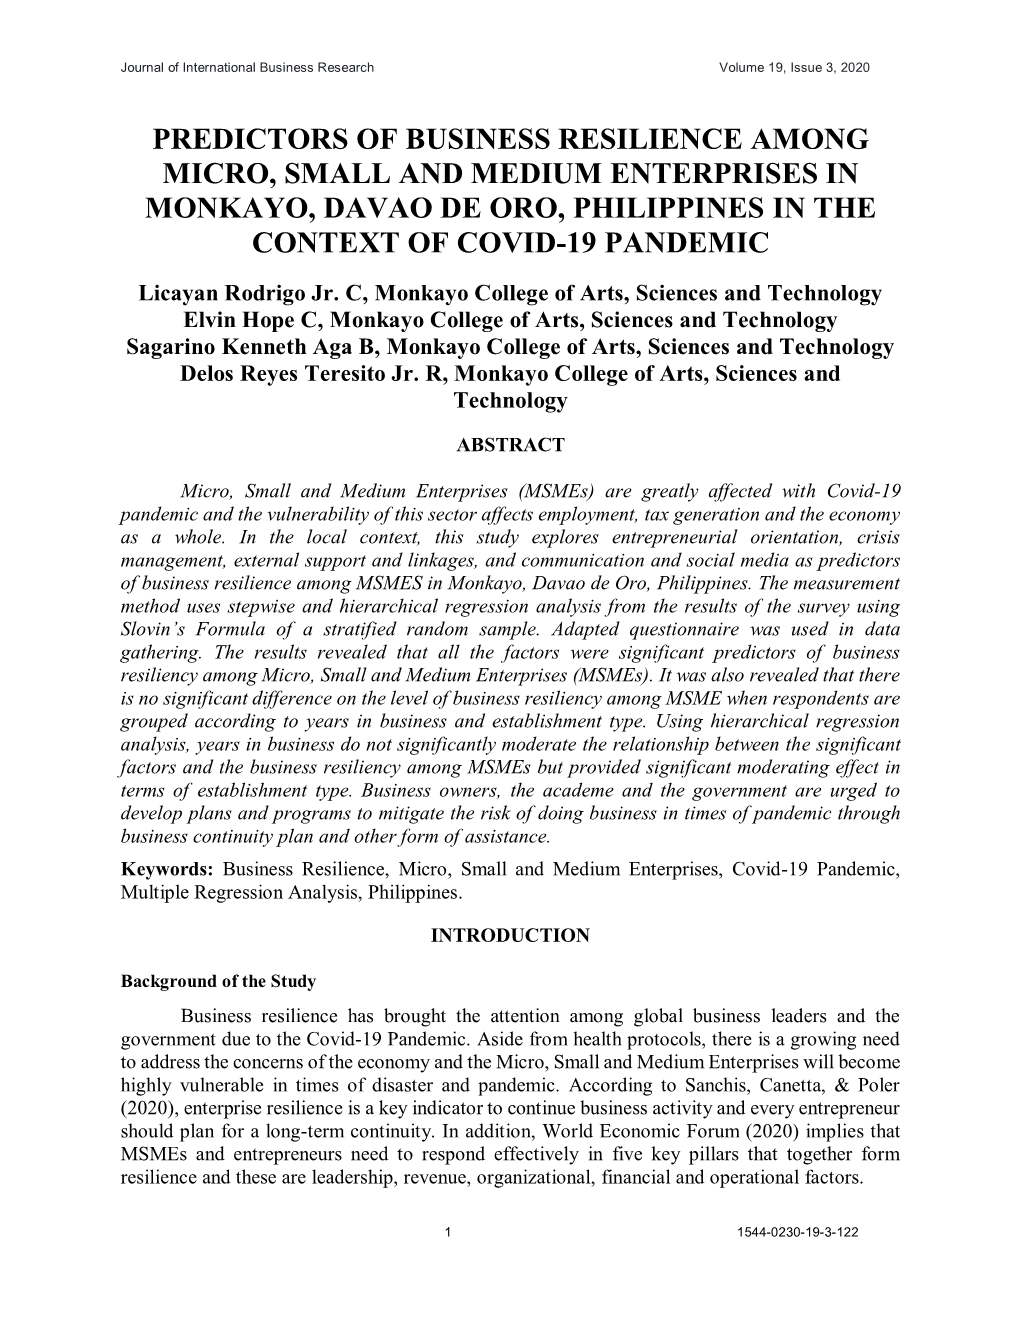 Predictors of Business Resilience Among Micro, Small and Medium Enterprises in Monkayo, Davao De Oro, Philippines in the Context of Covid-19 Pandemic